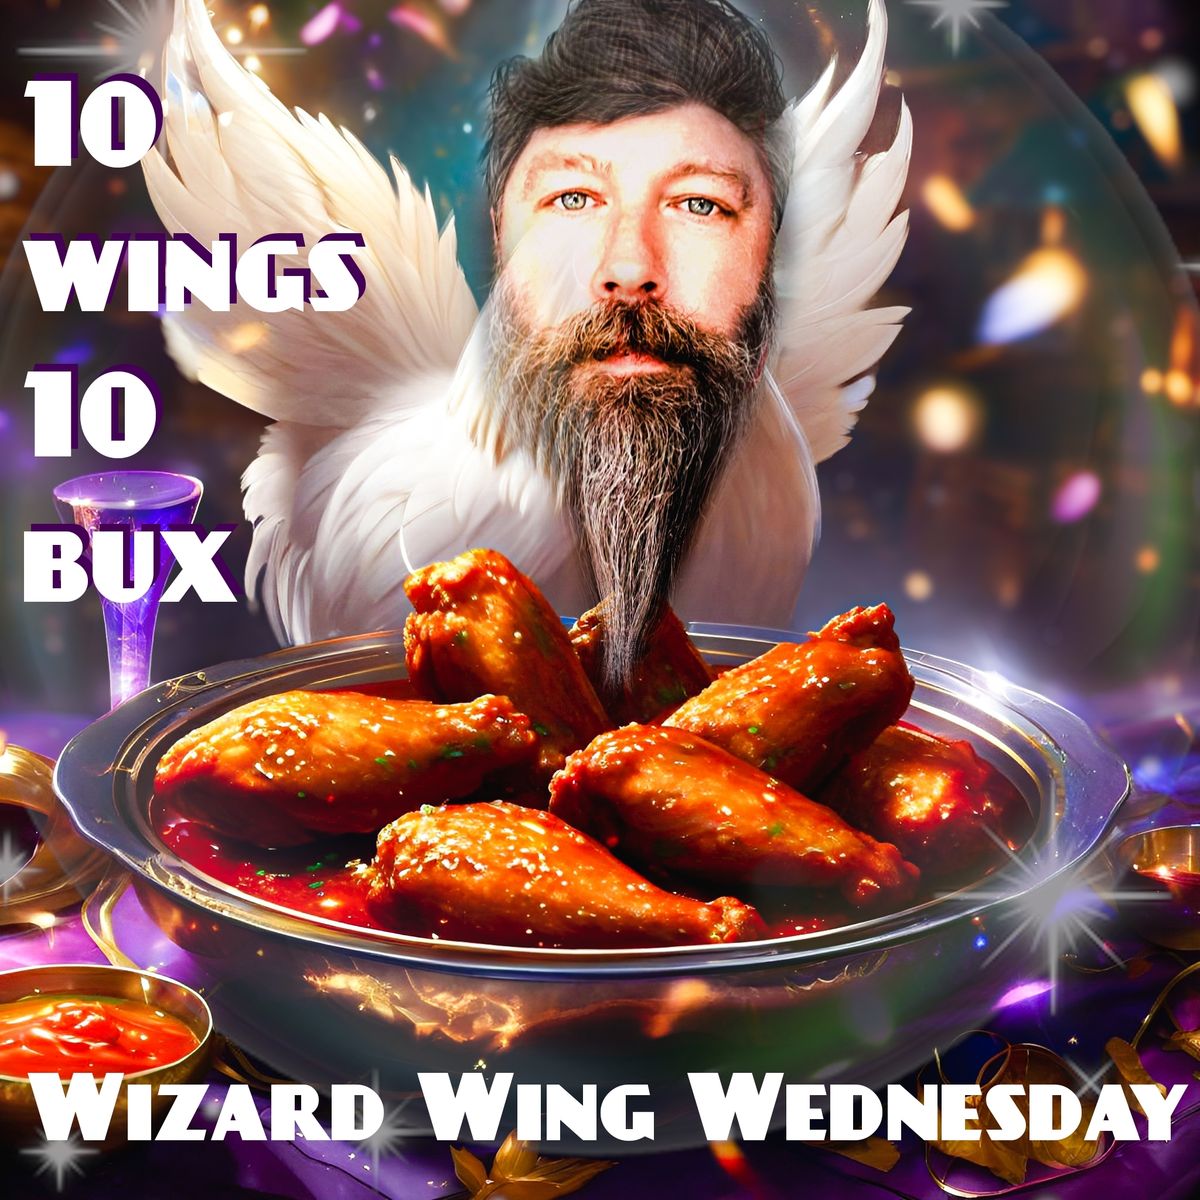 Wizard Wing Wednesdays, 10x Magical Wings for only $10 Bux